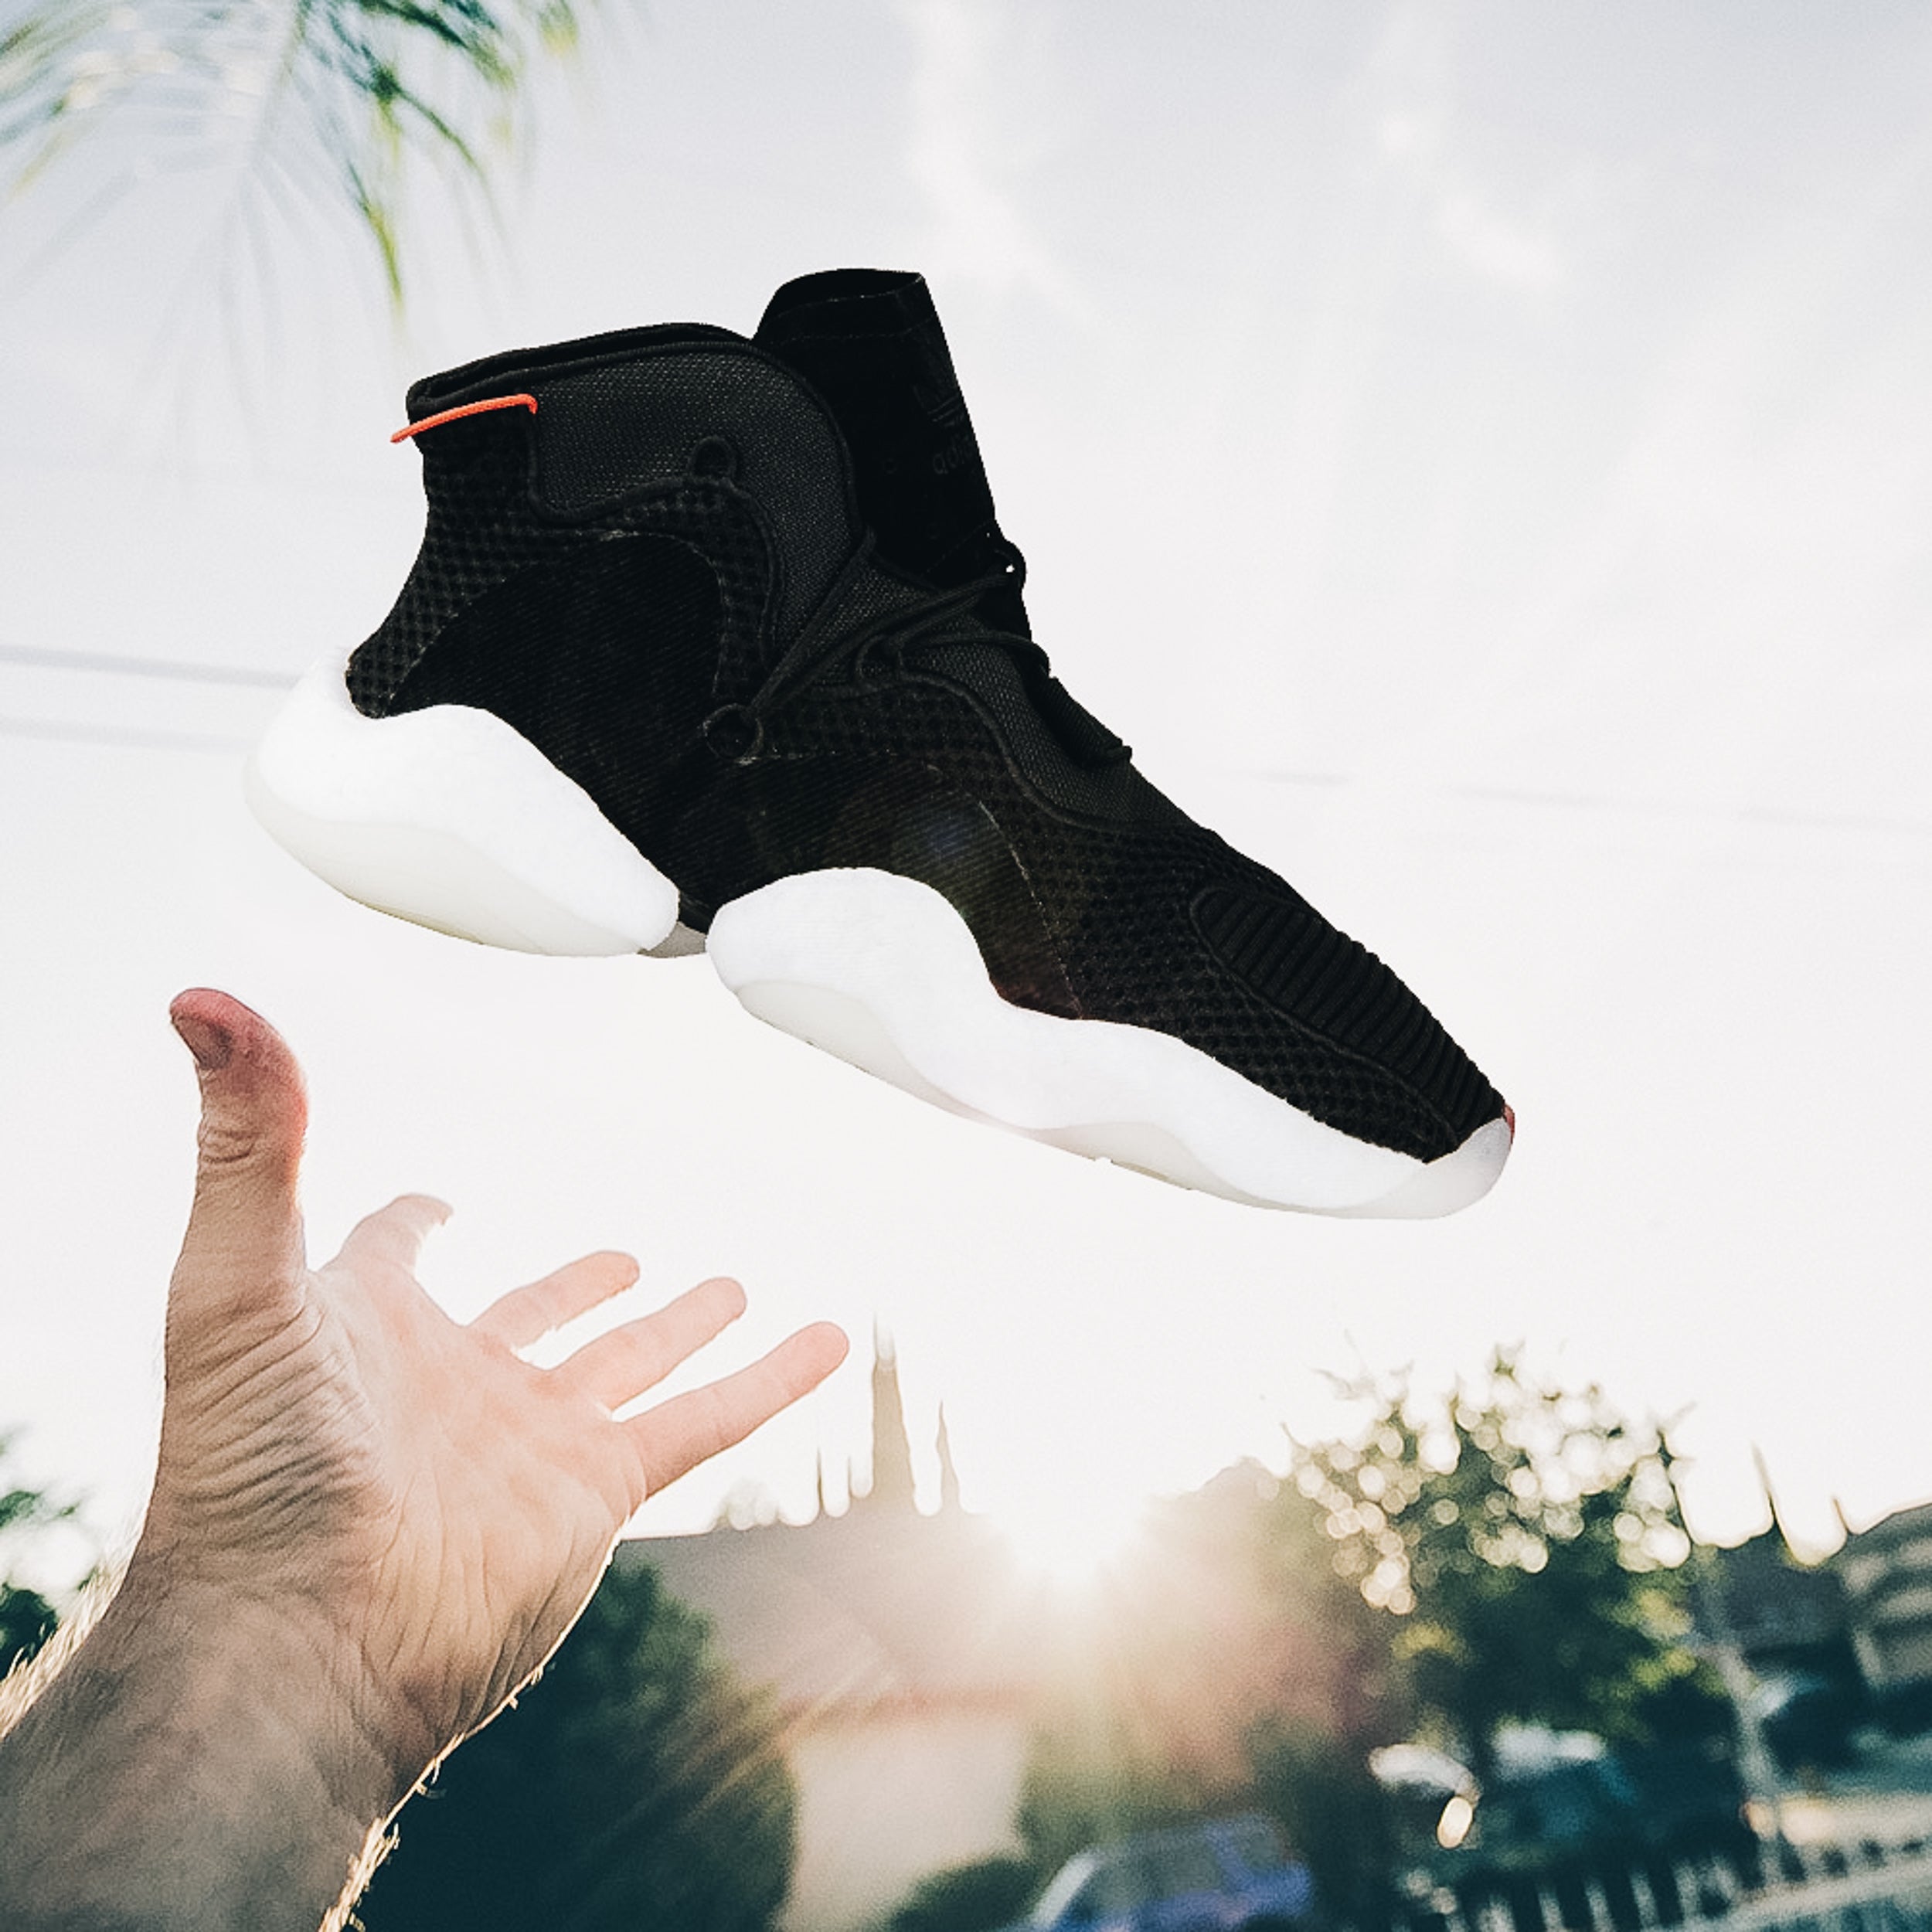 Adidas Crazy BYW Men's Sneaker– On The EDGE